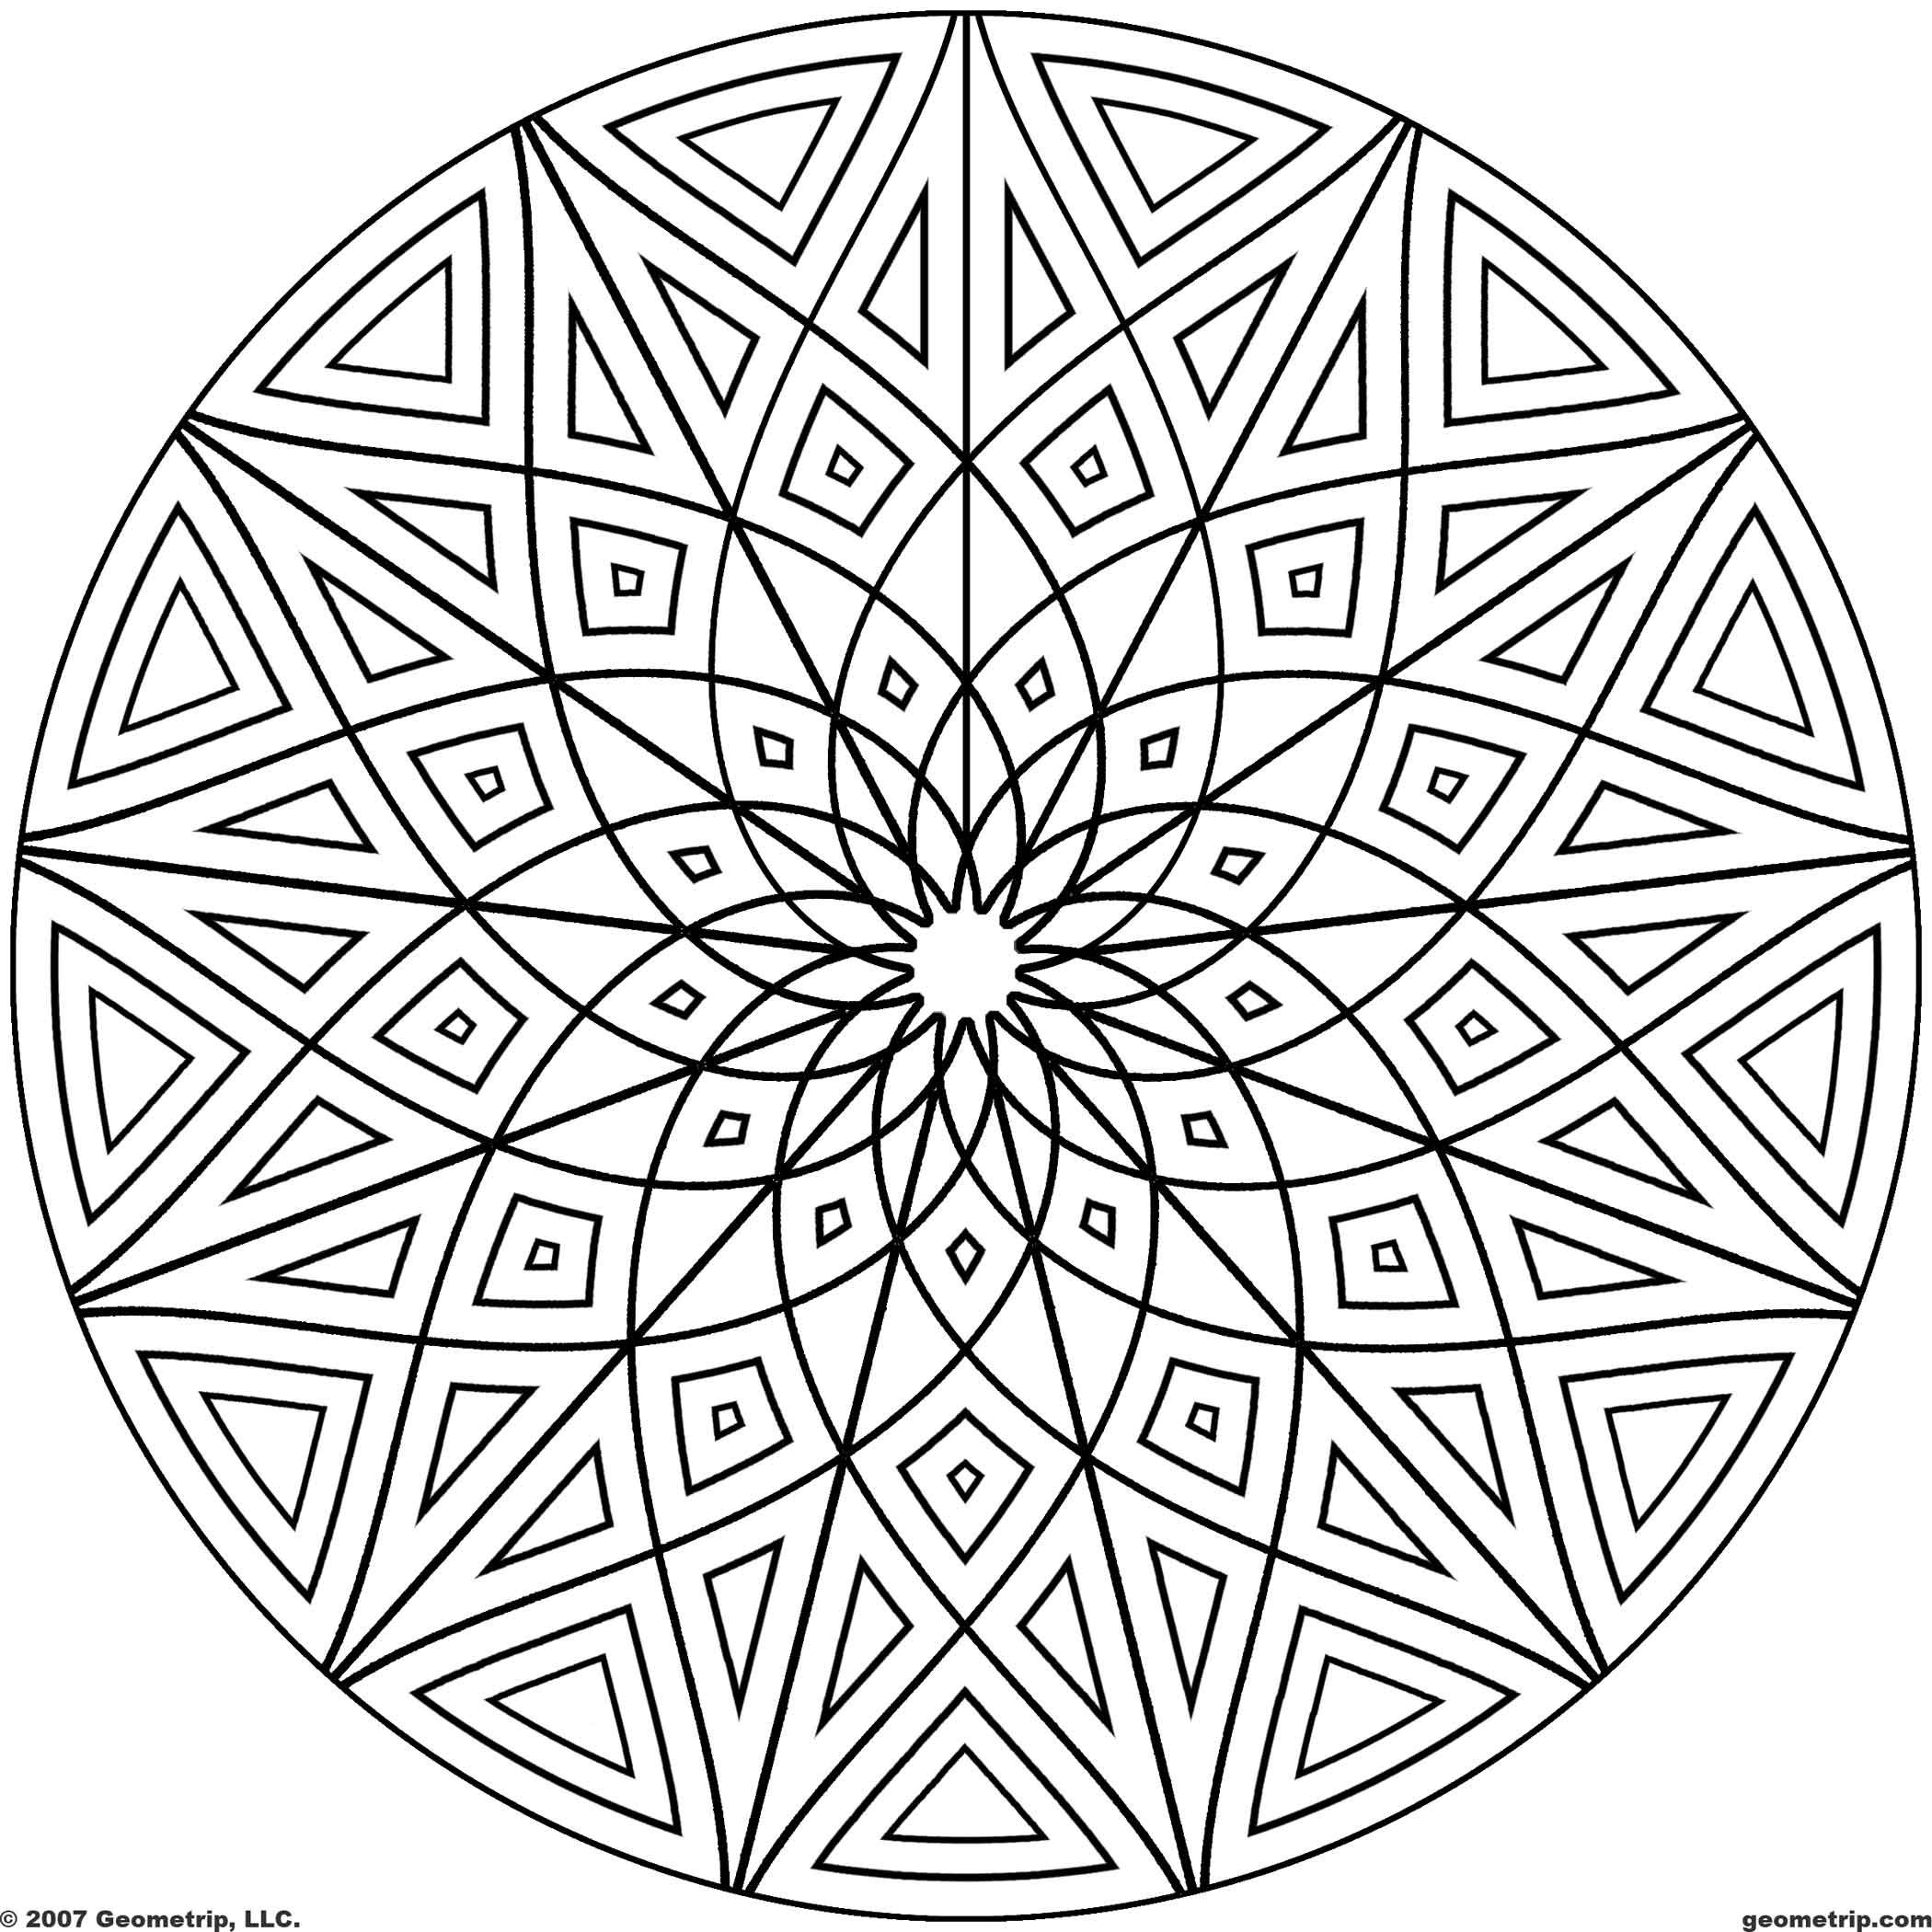 Free Geometric Coloring Designs - Circles | Geometric coloring pages,  Geometric patterns coloring, Pattern coloring pages